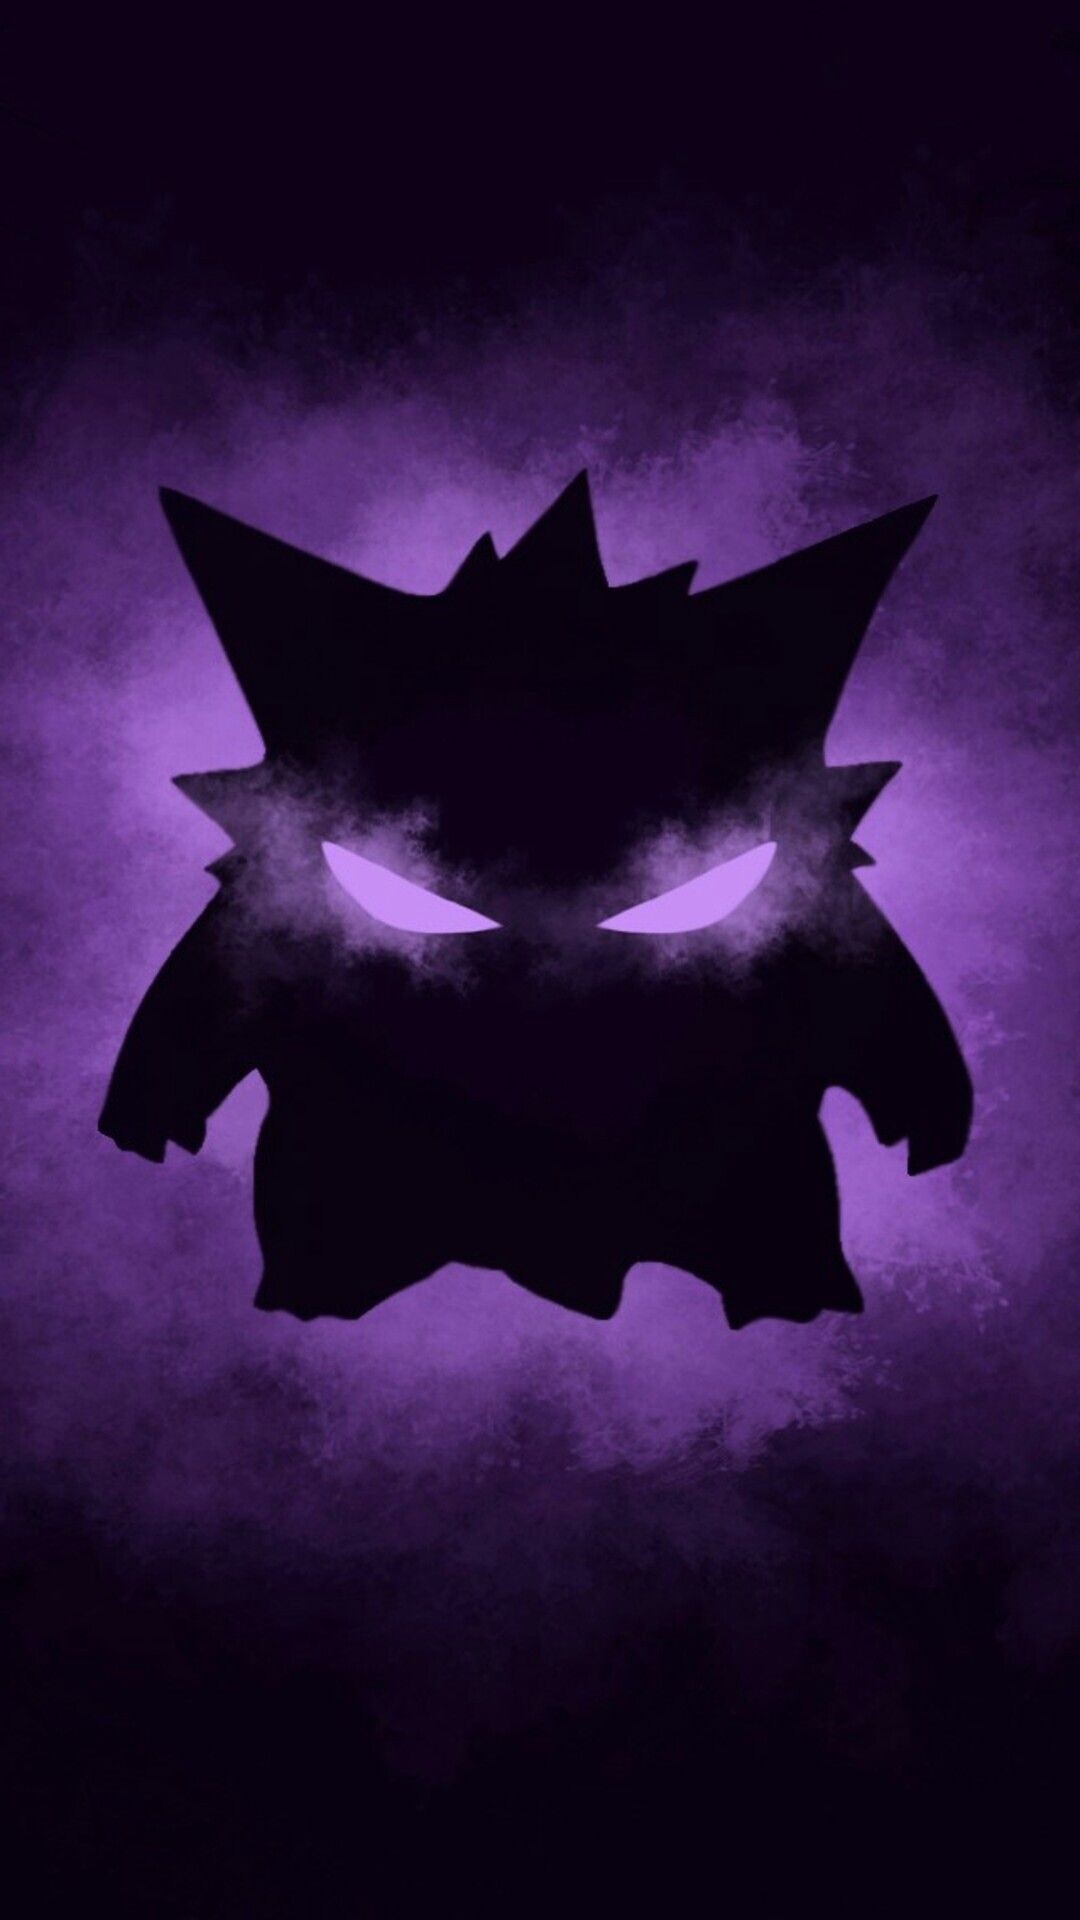 Gengar: Pokemon video games, Creature in the dark, Creeping out in the dead of night. 1080x1920 Full HD Wallpaper.